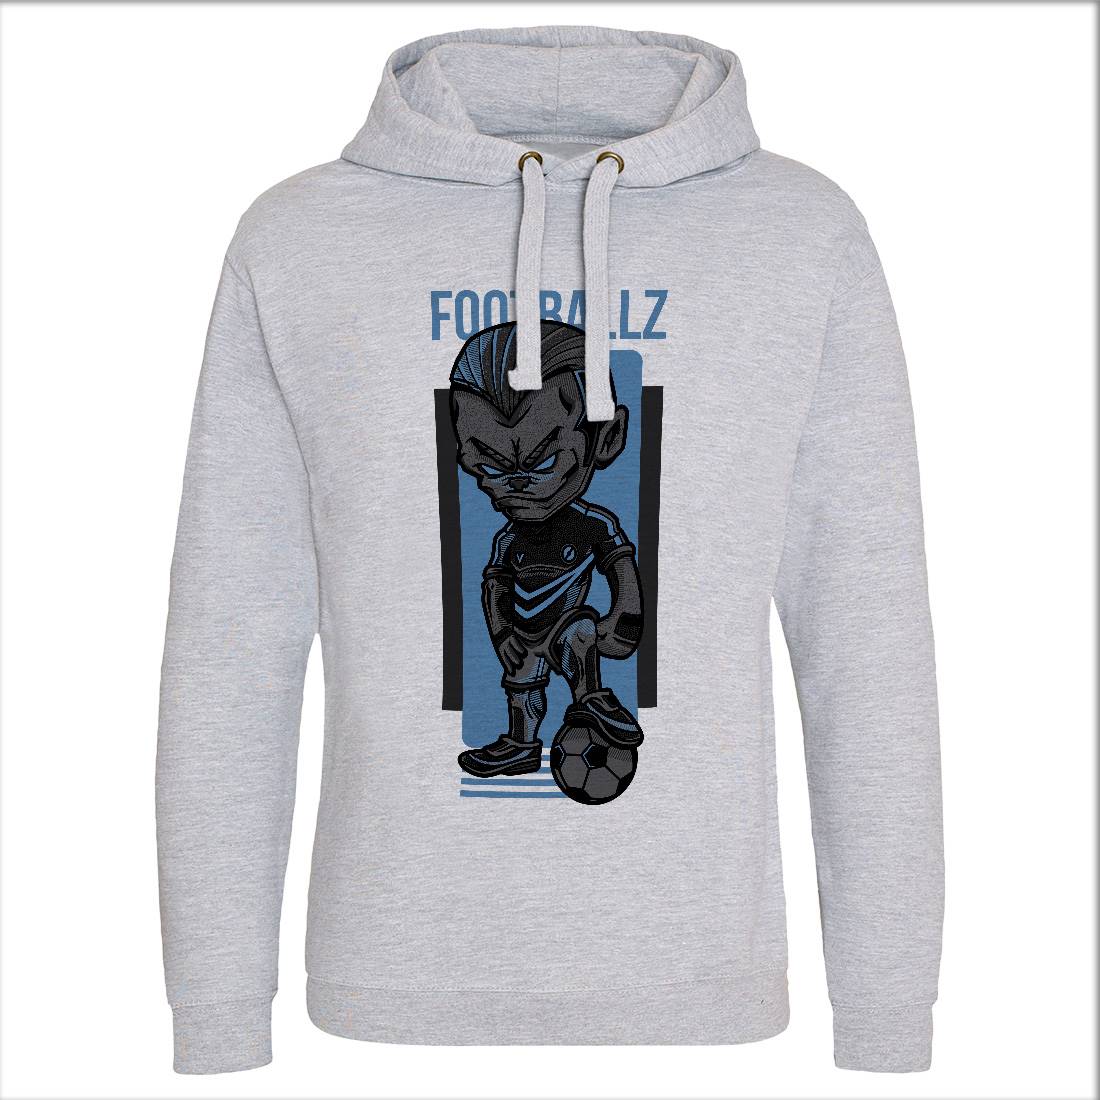 Football Mens Hoodie Without Pocket Sport D779